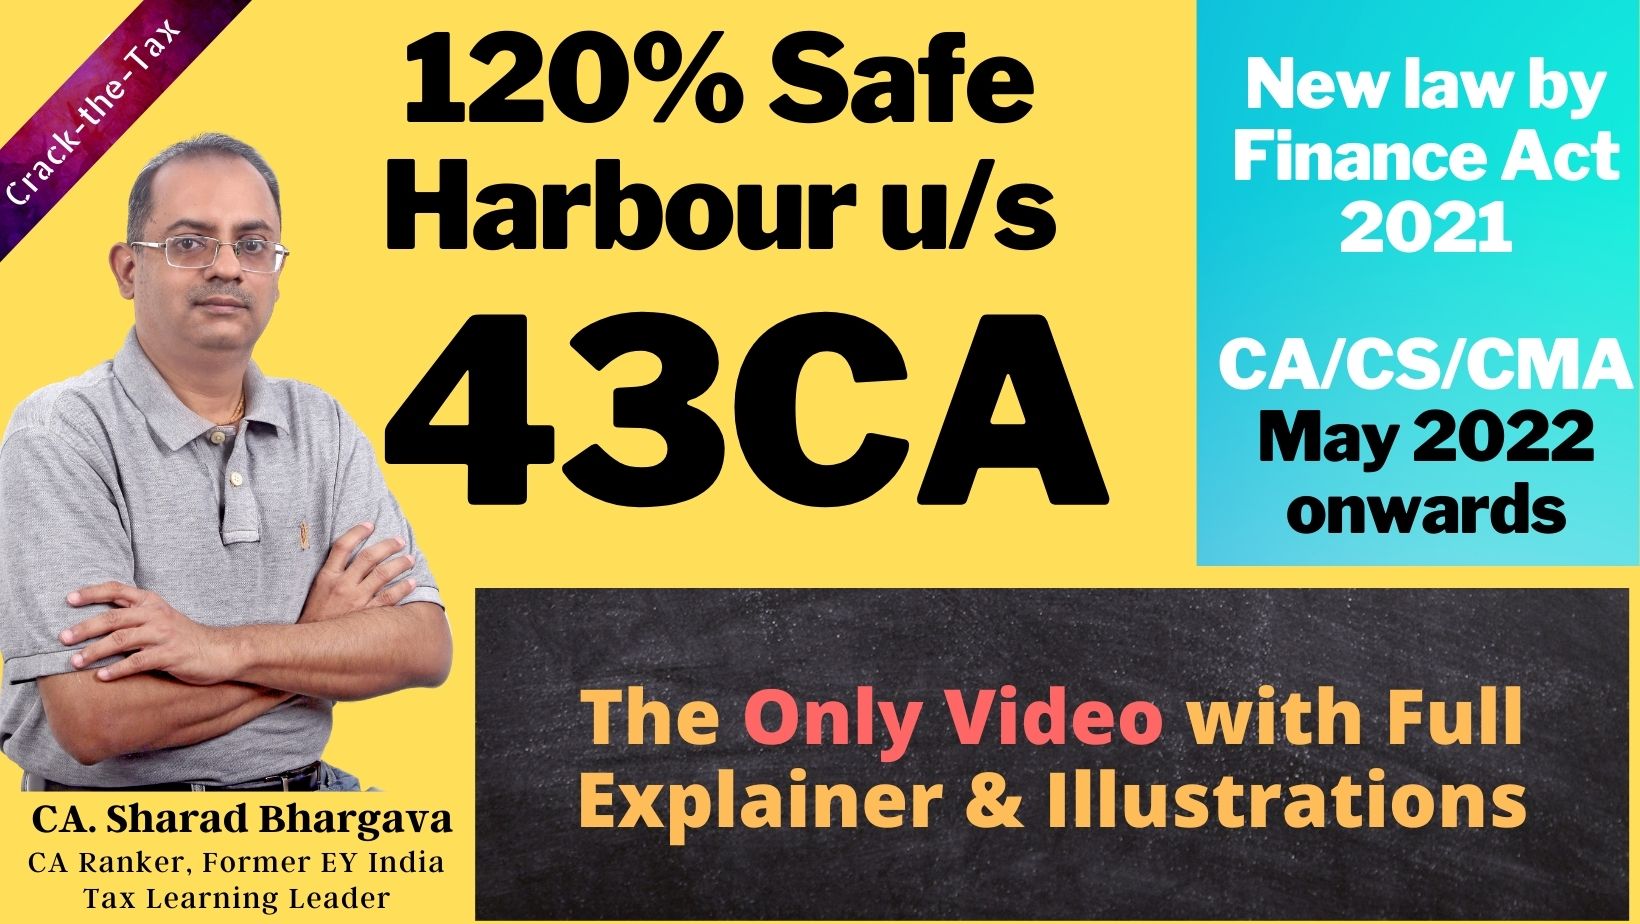 Safe Harbour Limit u/s 43CA // New law by Finance Act 2021 // By CA. Sharad Bhargava